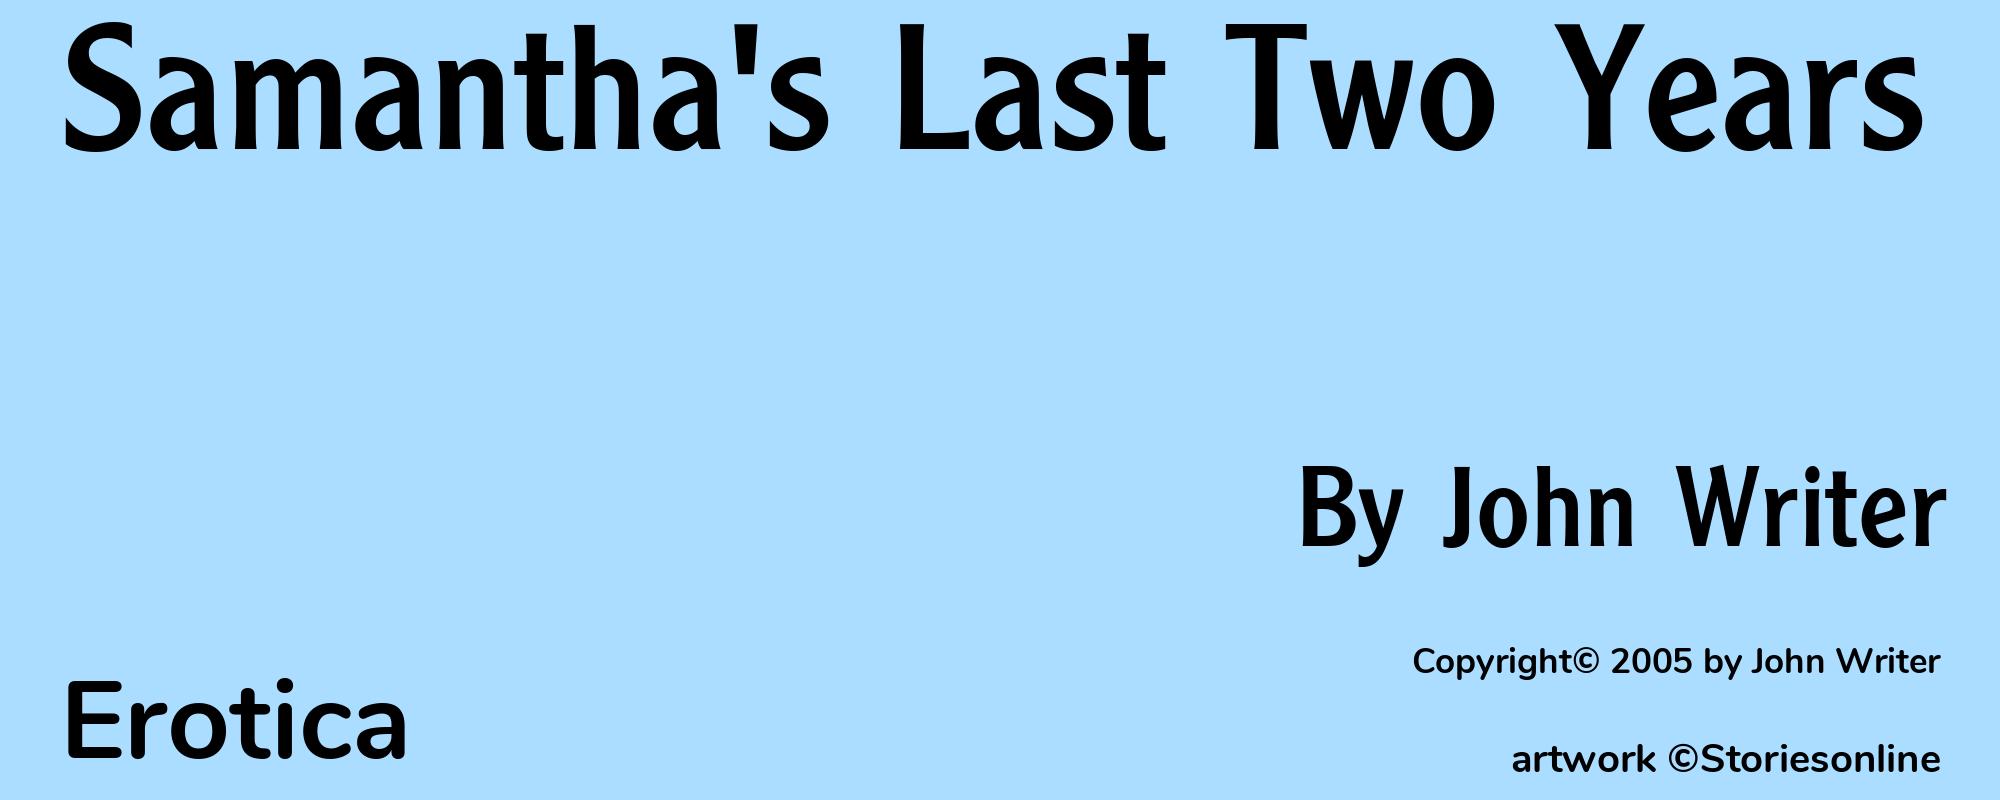 Samantha's Last Two Years - Cover